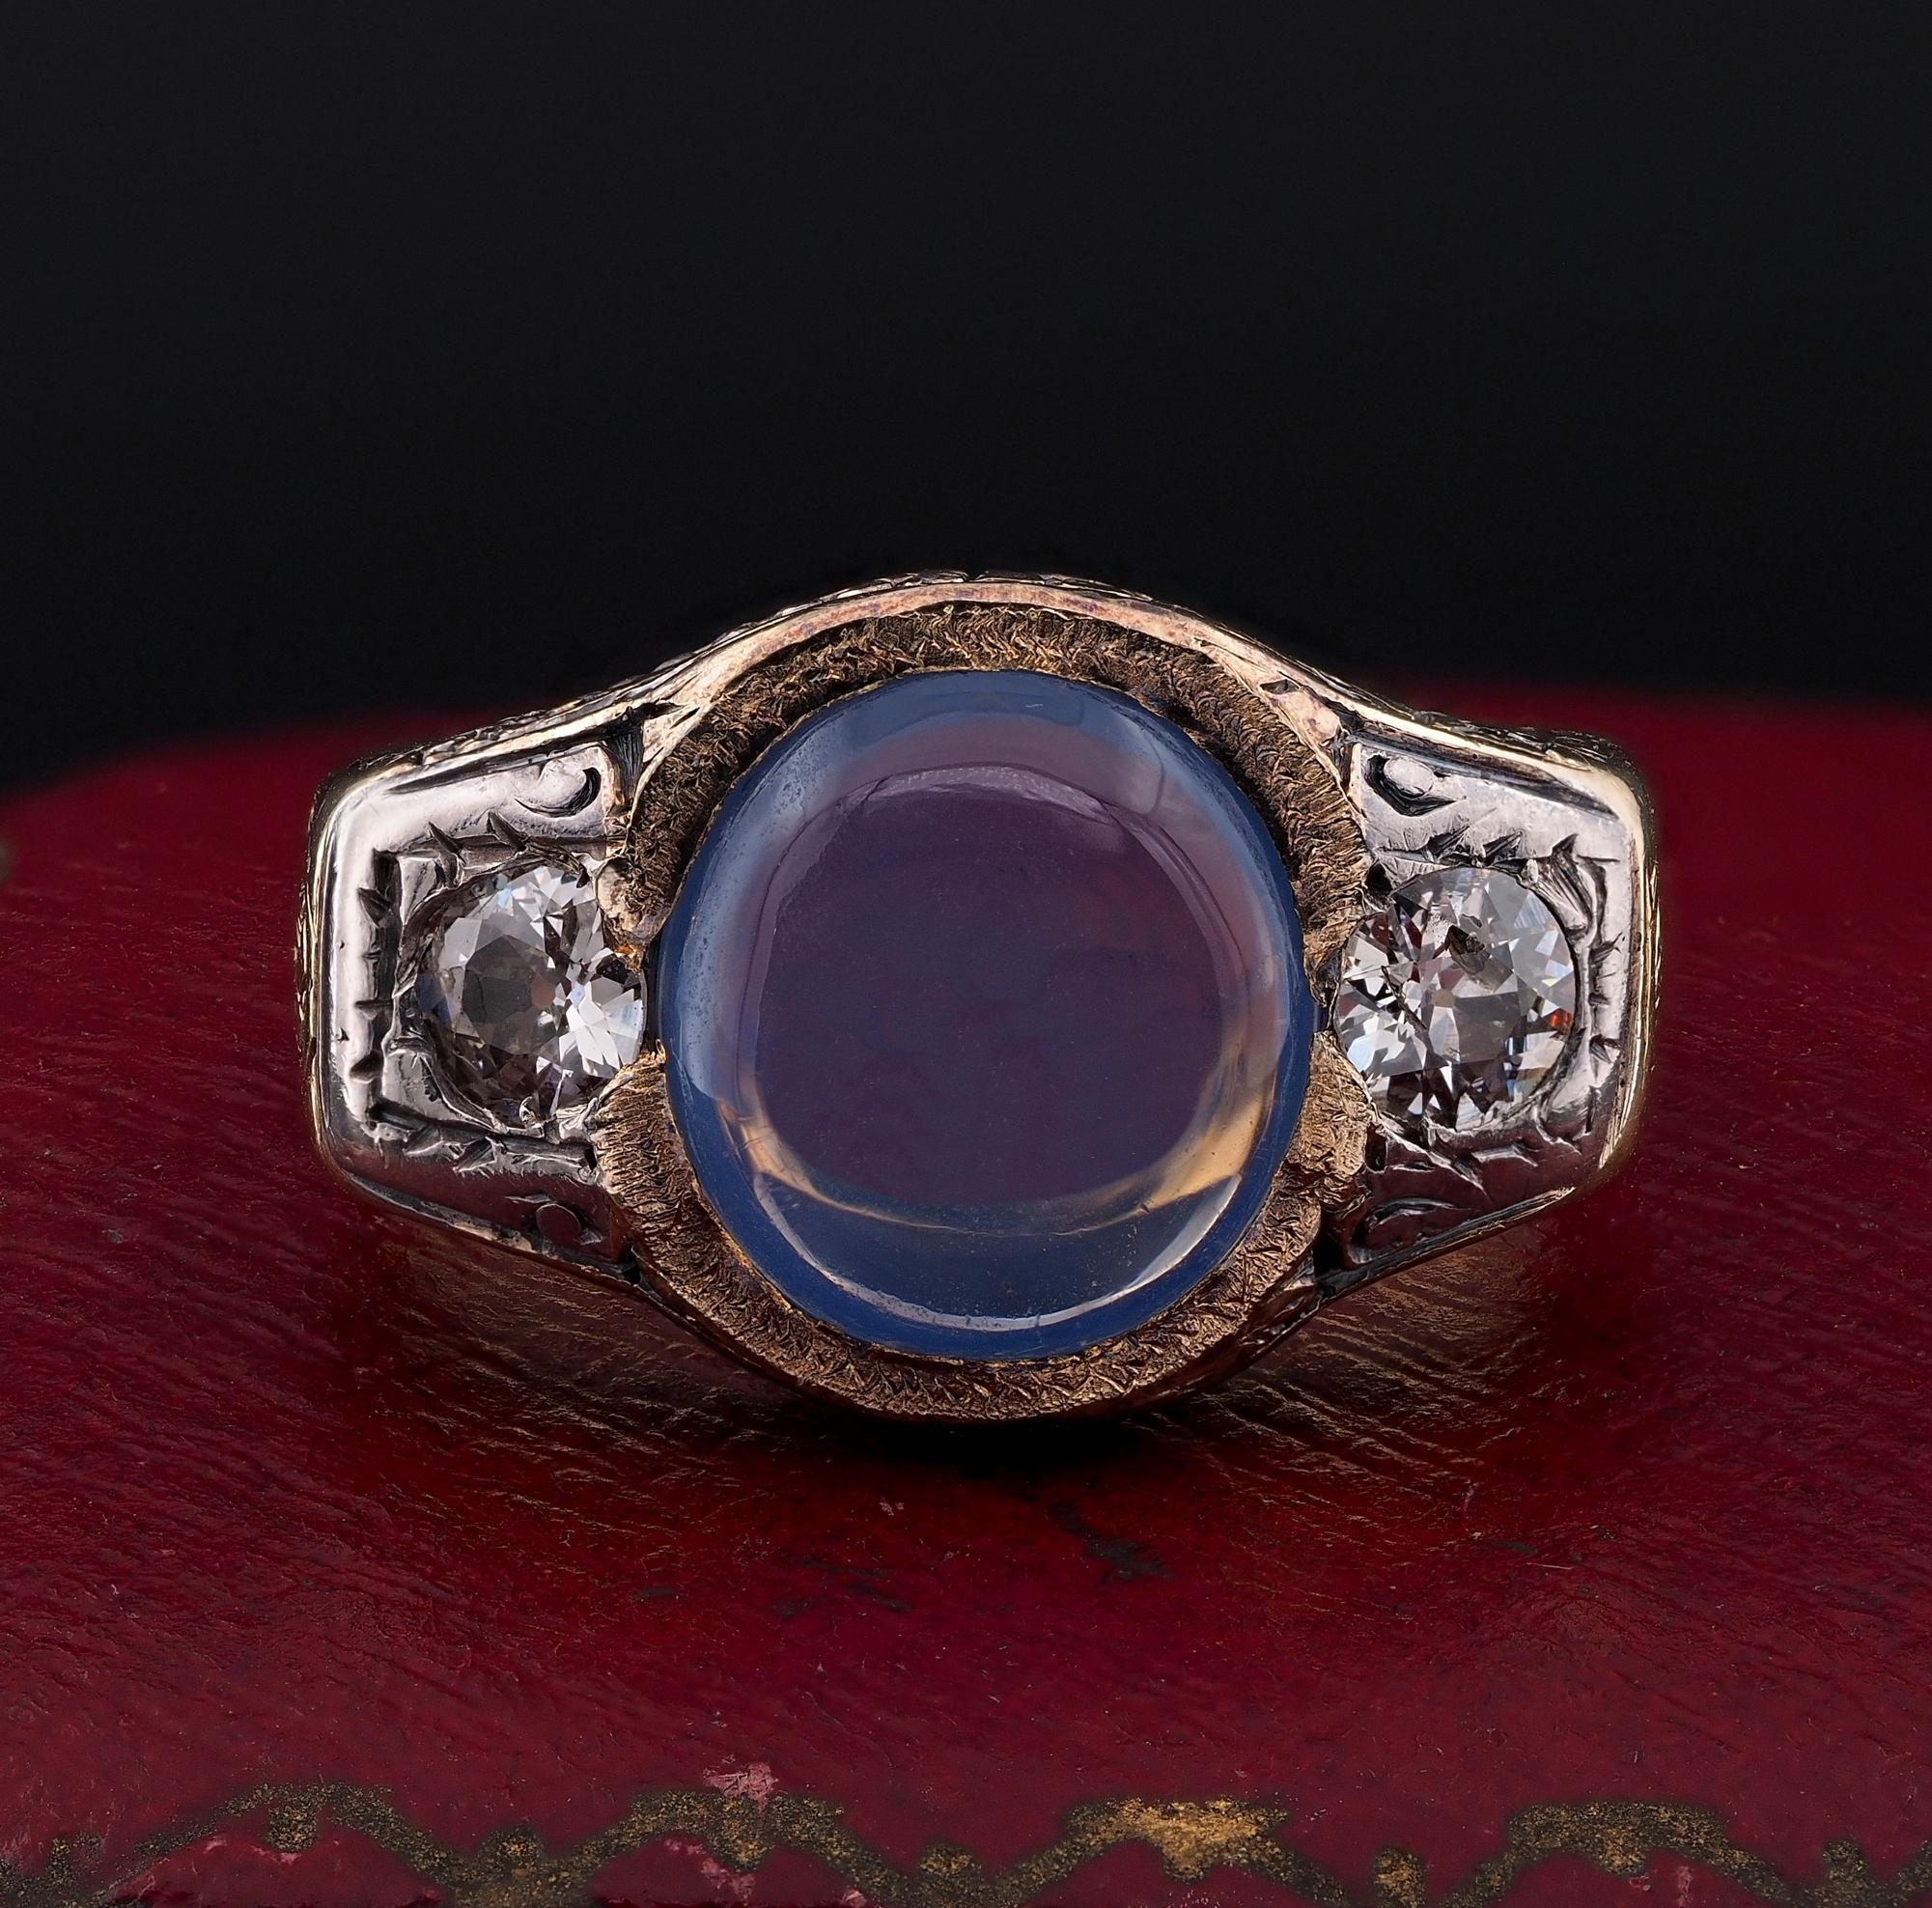 Past Signature Ring
This beautiful antique ring is Edwardian period, substantially hand crafted of solid 18 Kt gold, stamped internally and punched with outside worn hallmarks hardly readable, possibly Austro Hungarian origin
Appealing rare trilogy